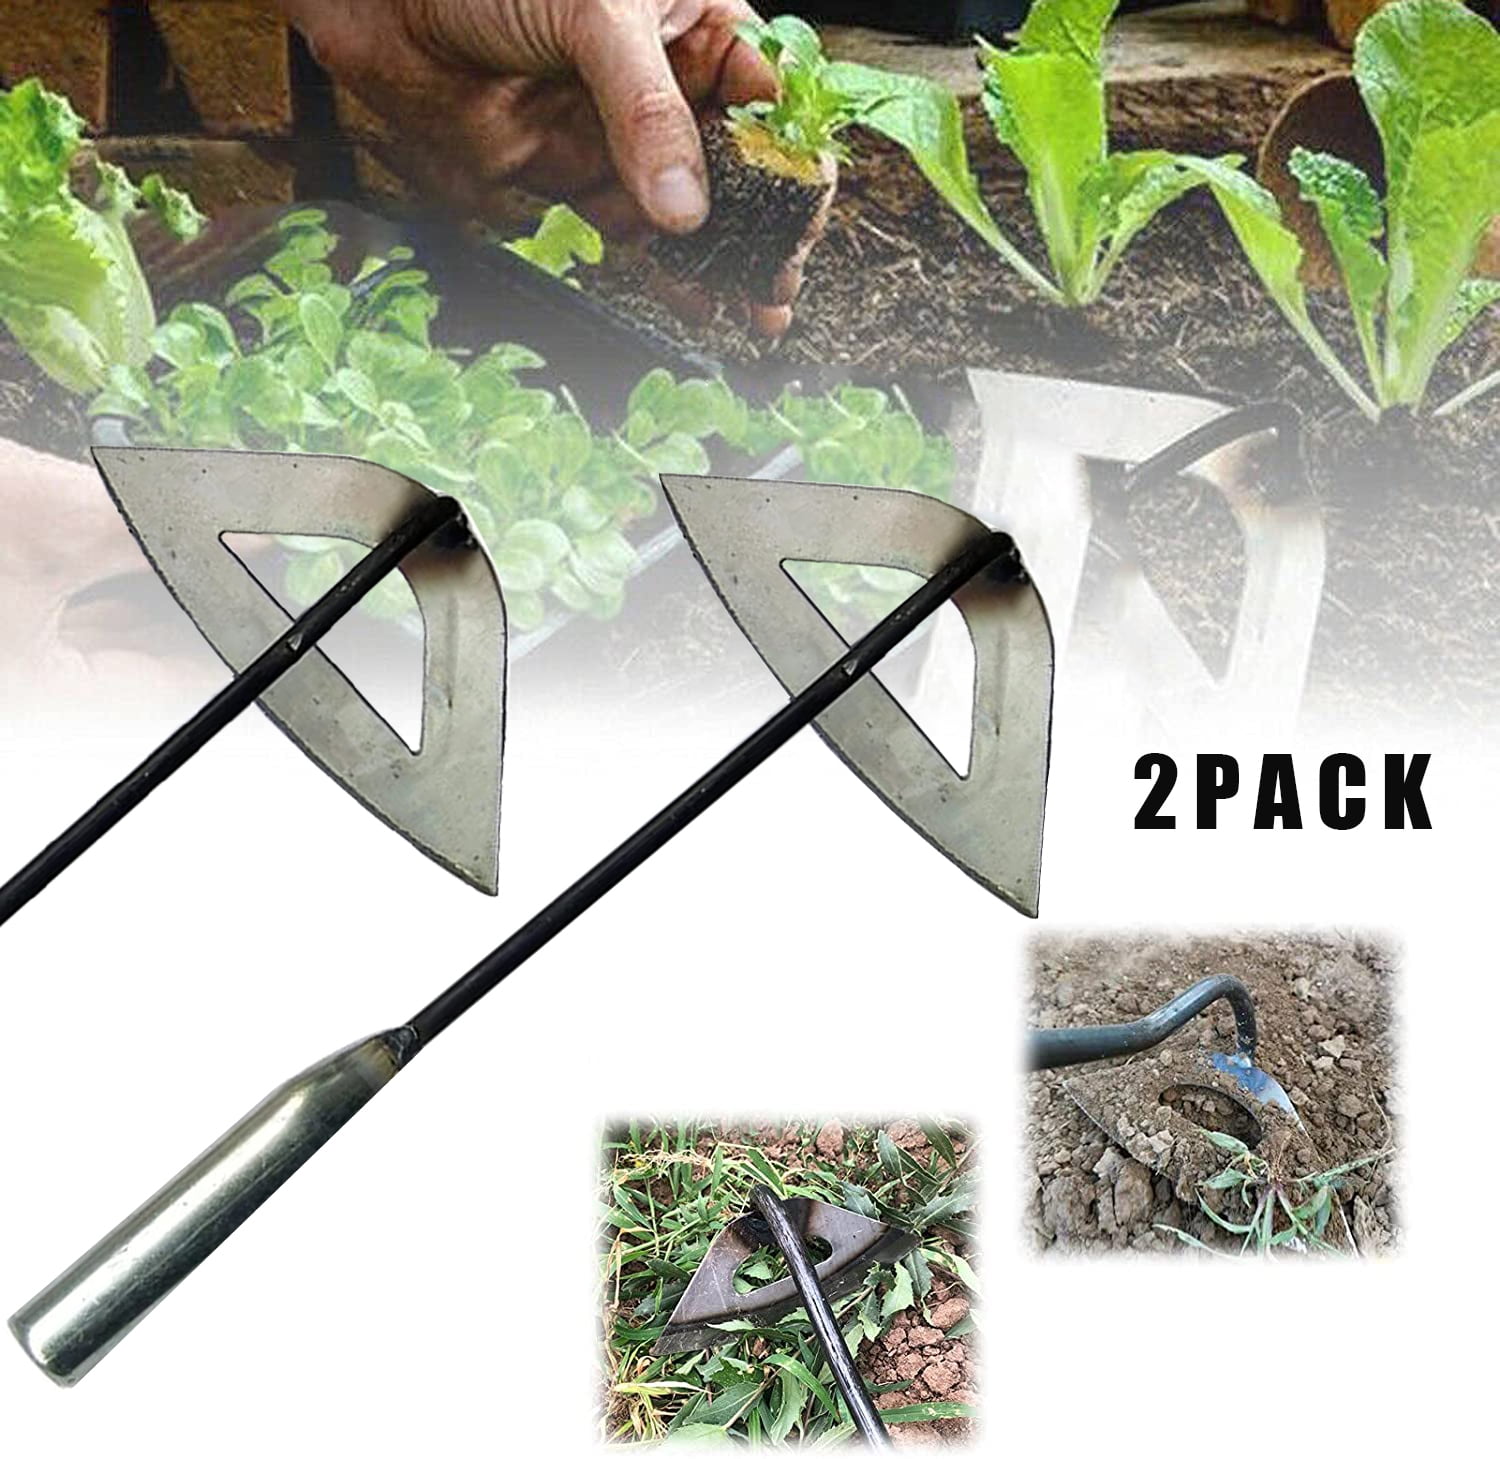 2PACK All-steel Hardened Hollow Hoe, Durable Hollow hoe for Weeding ...